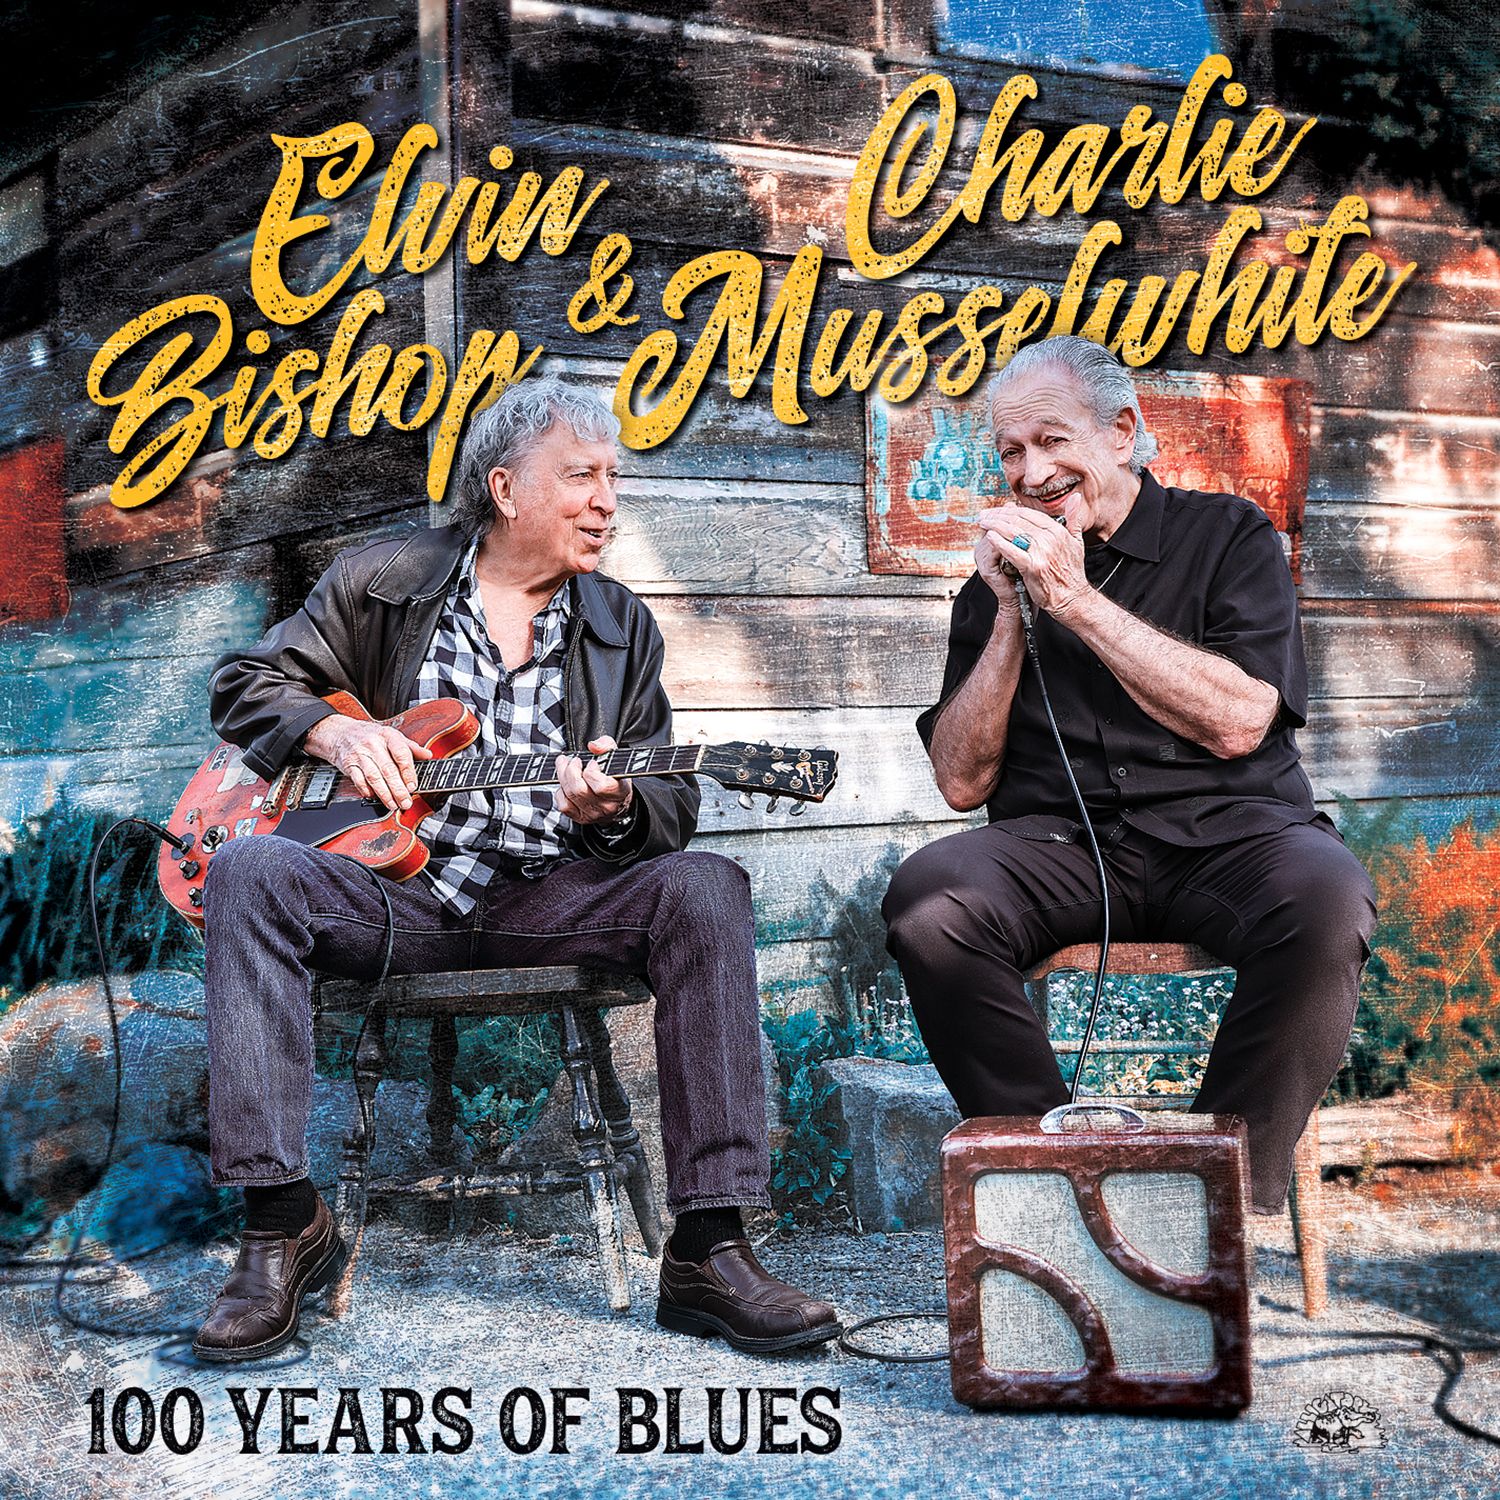 Elvin Bishop & Charlie Musselwhite's 100 Years Of Blues Nominated in Best Traditional Blues Album Category